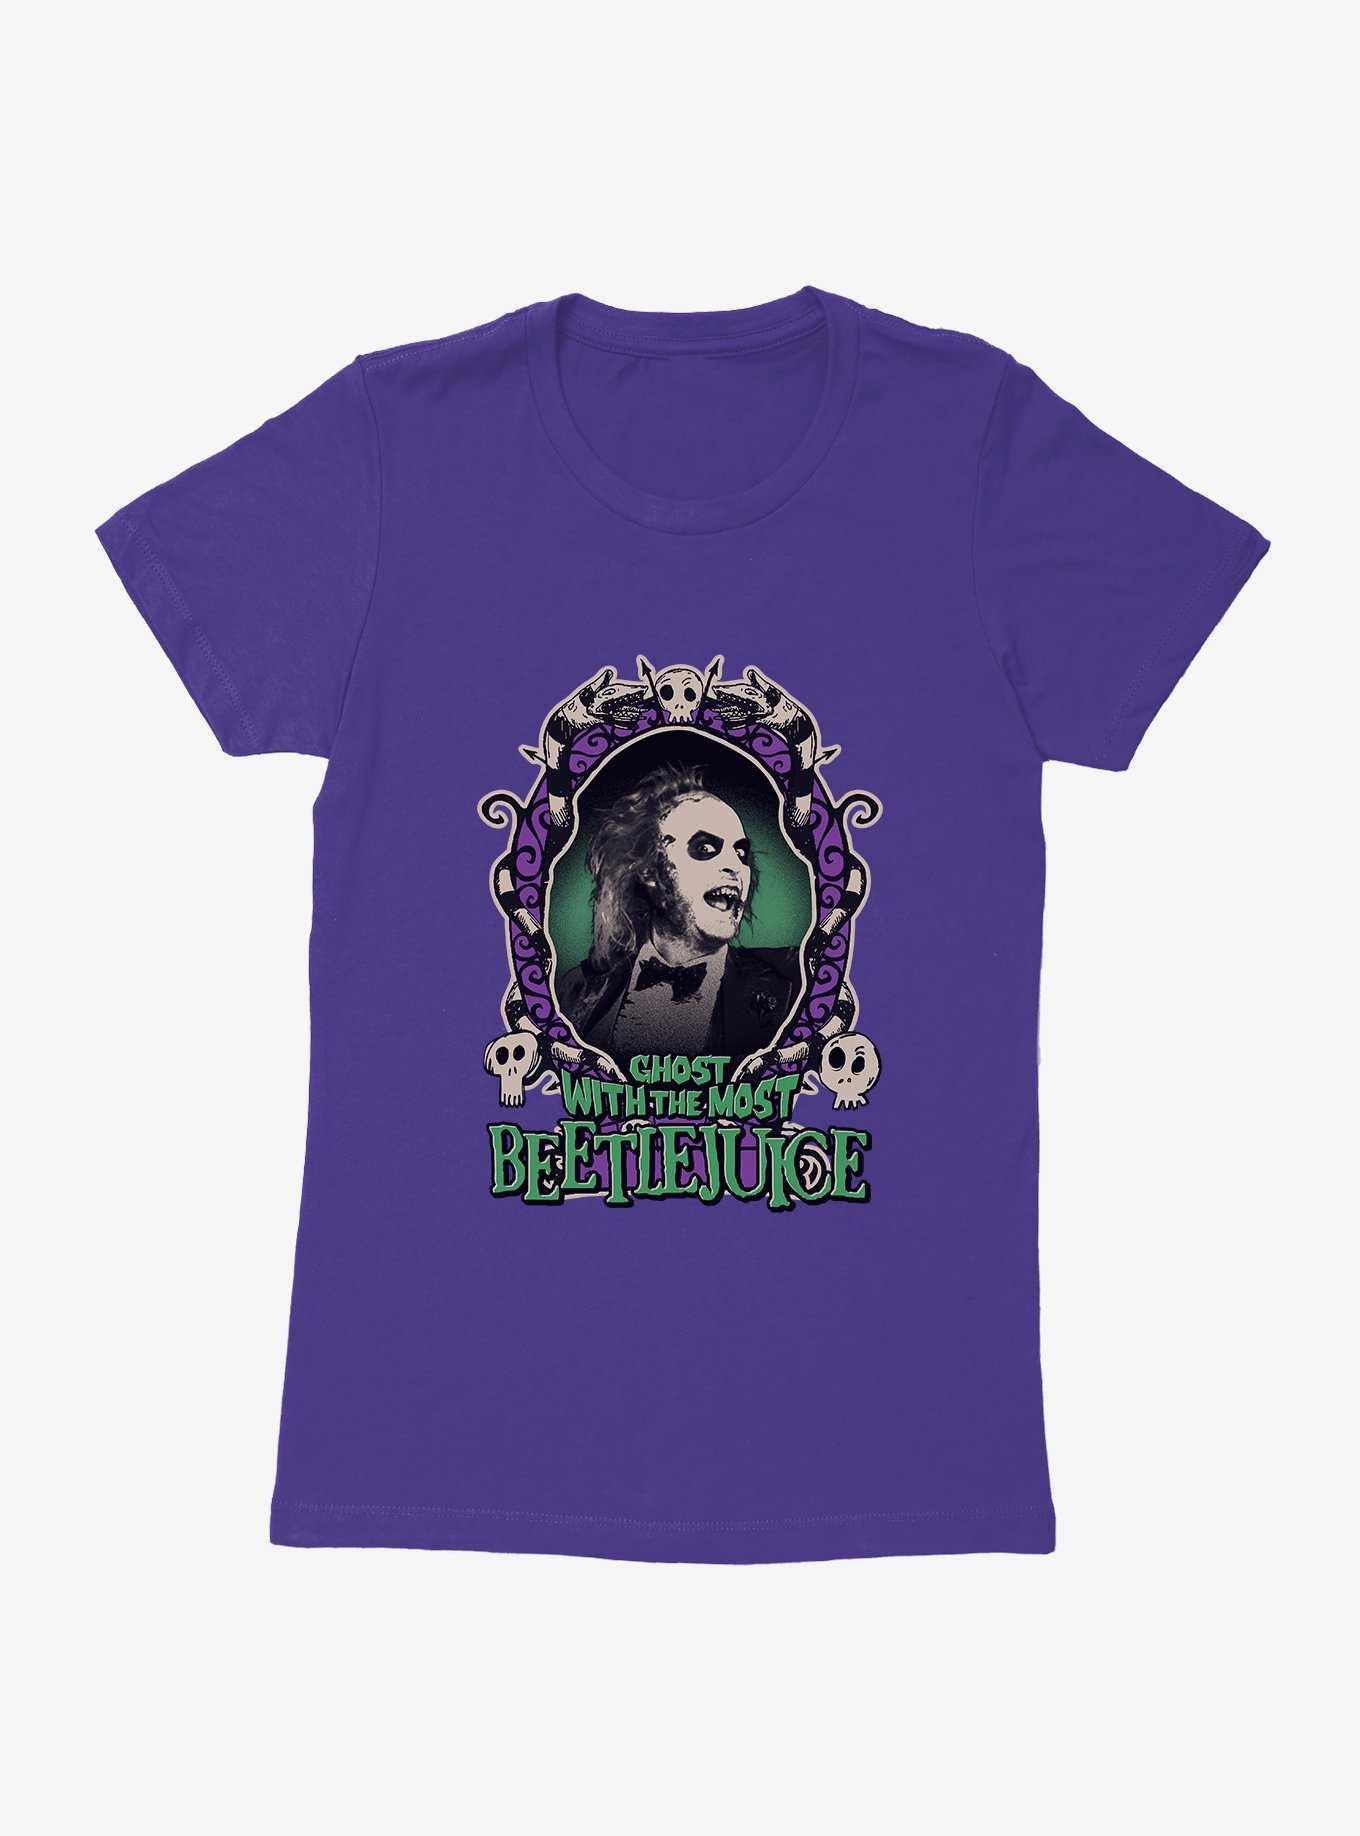 Beetlejuice Ghost With The Most Womens T-Shirt, , hi-res